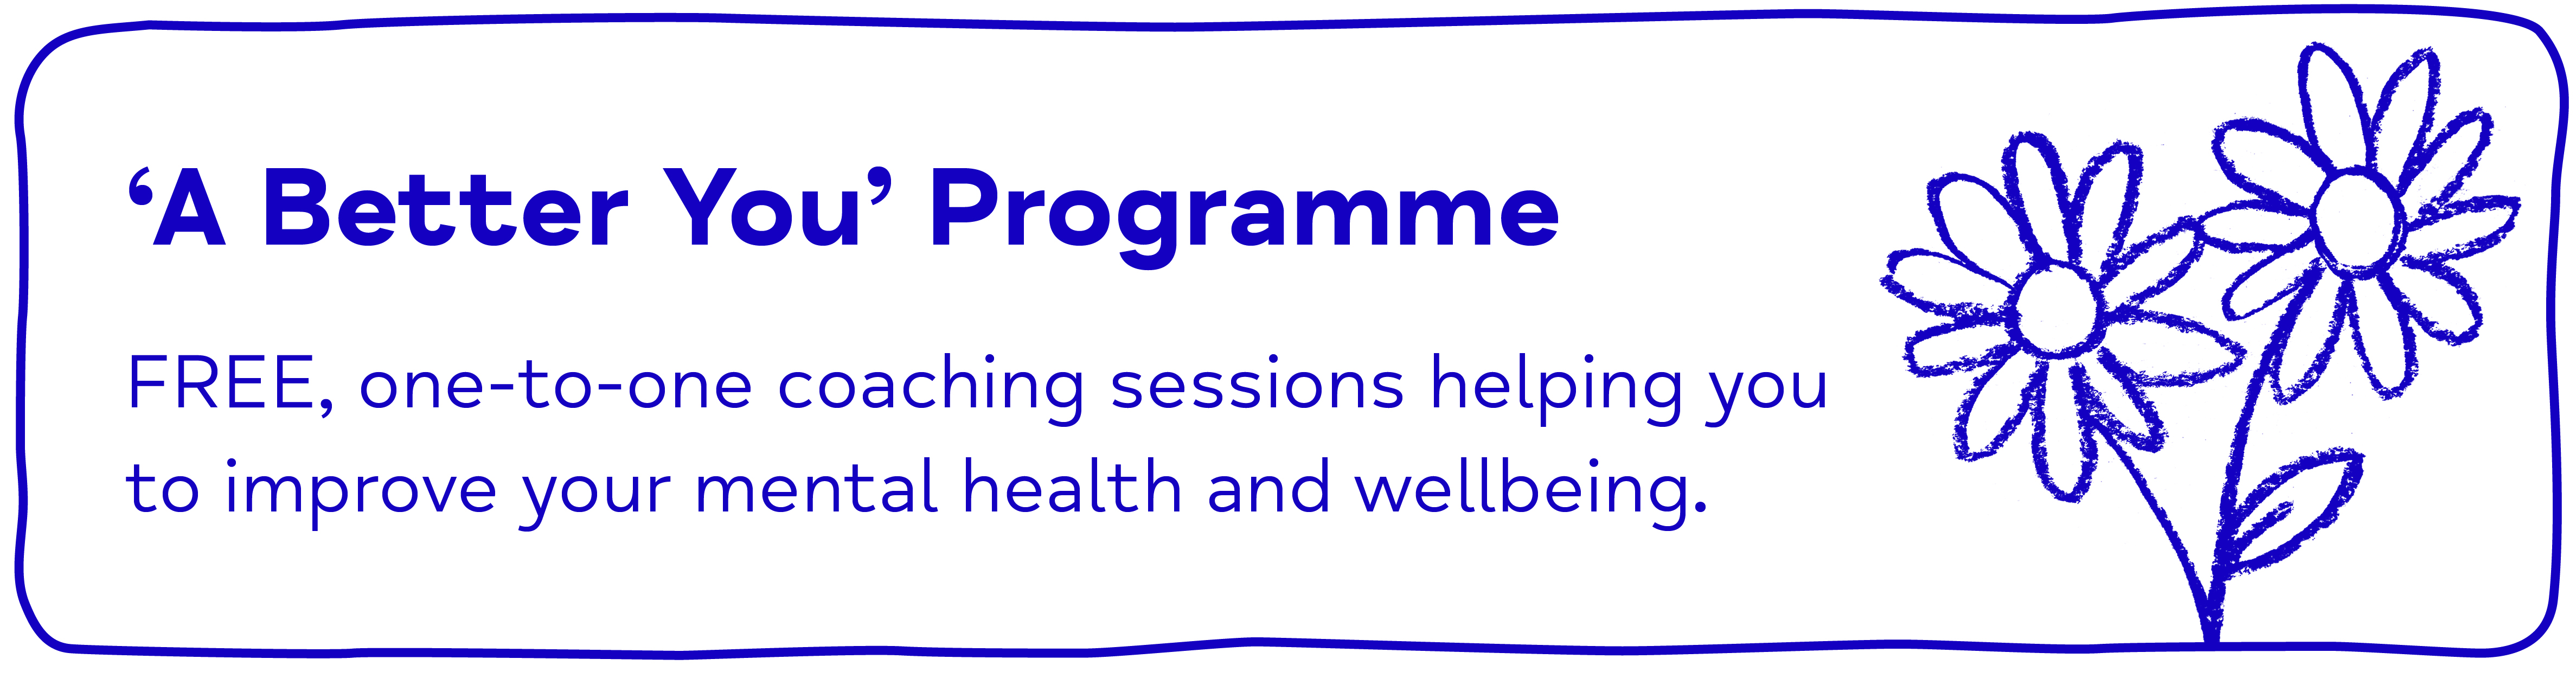 A Better You - Programme FREE, one-to-one coaching sessions helping you to improve your mental health and wellbeing.